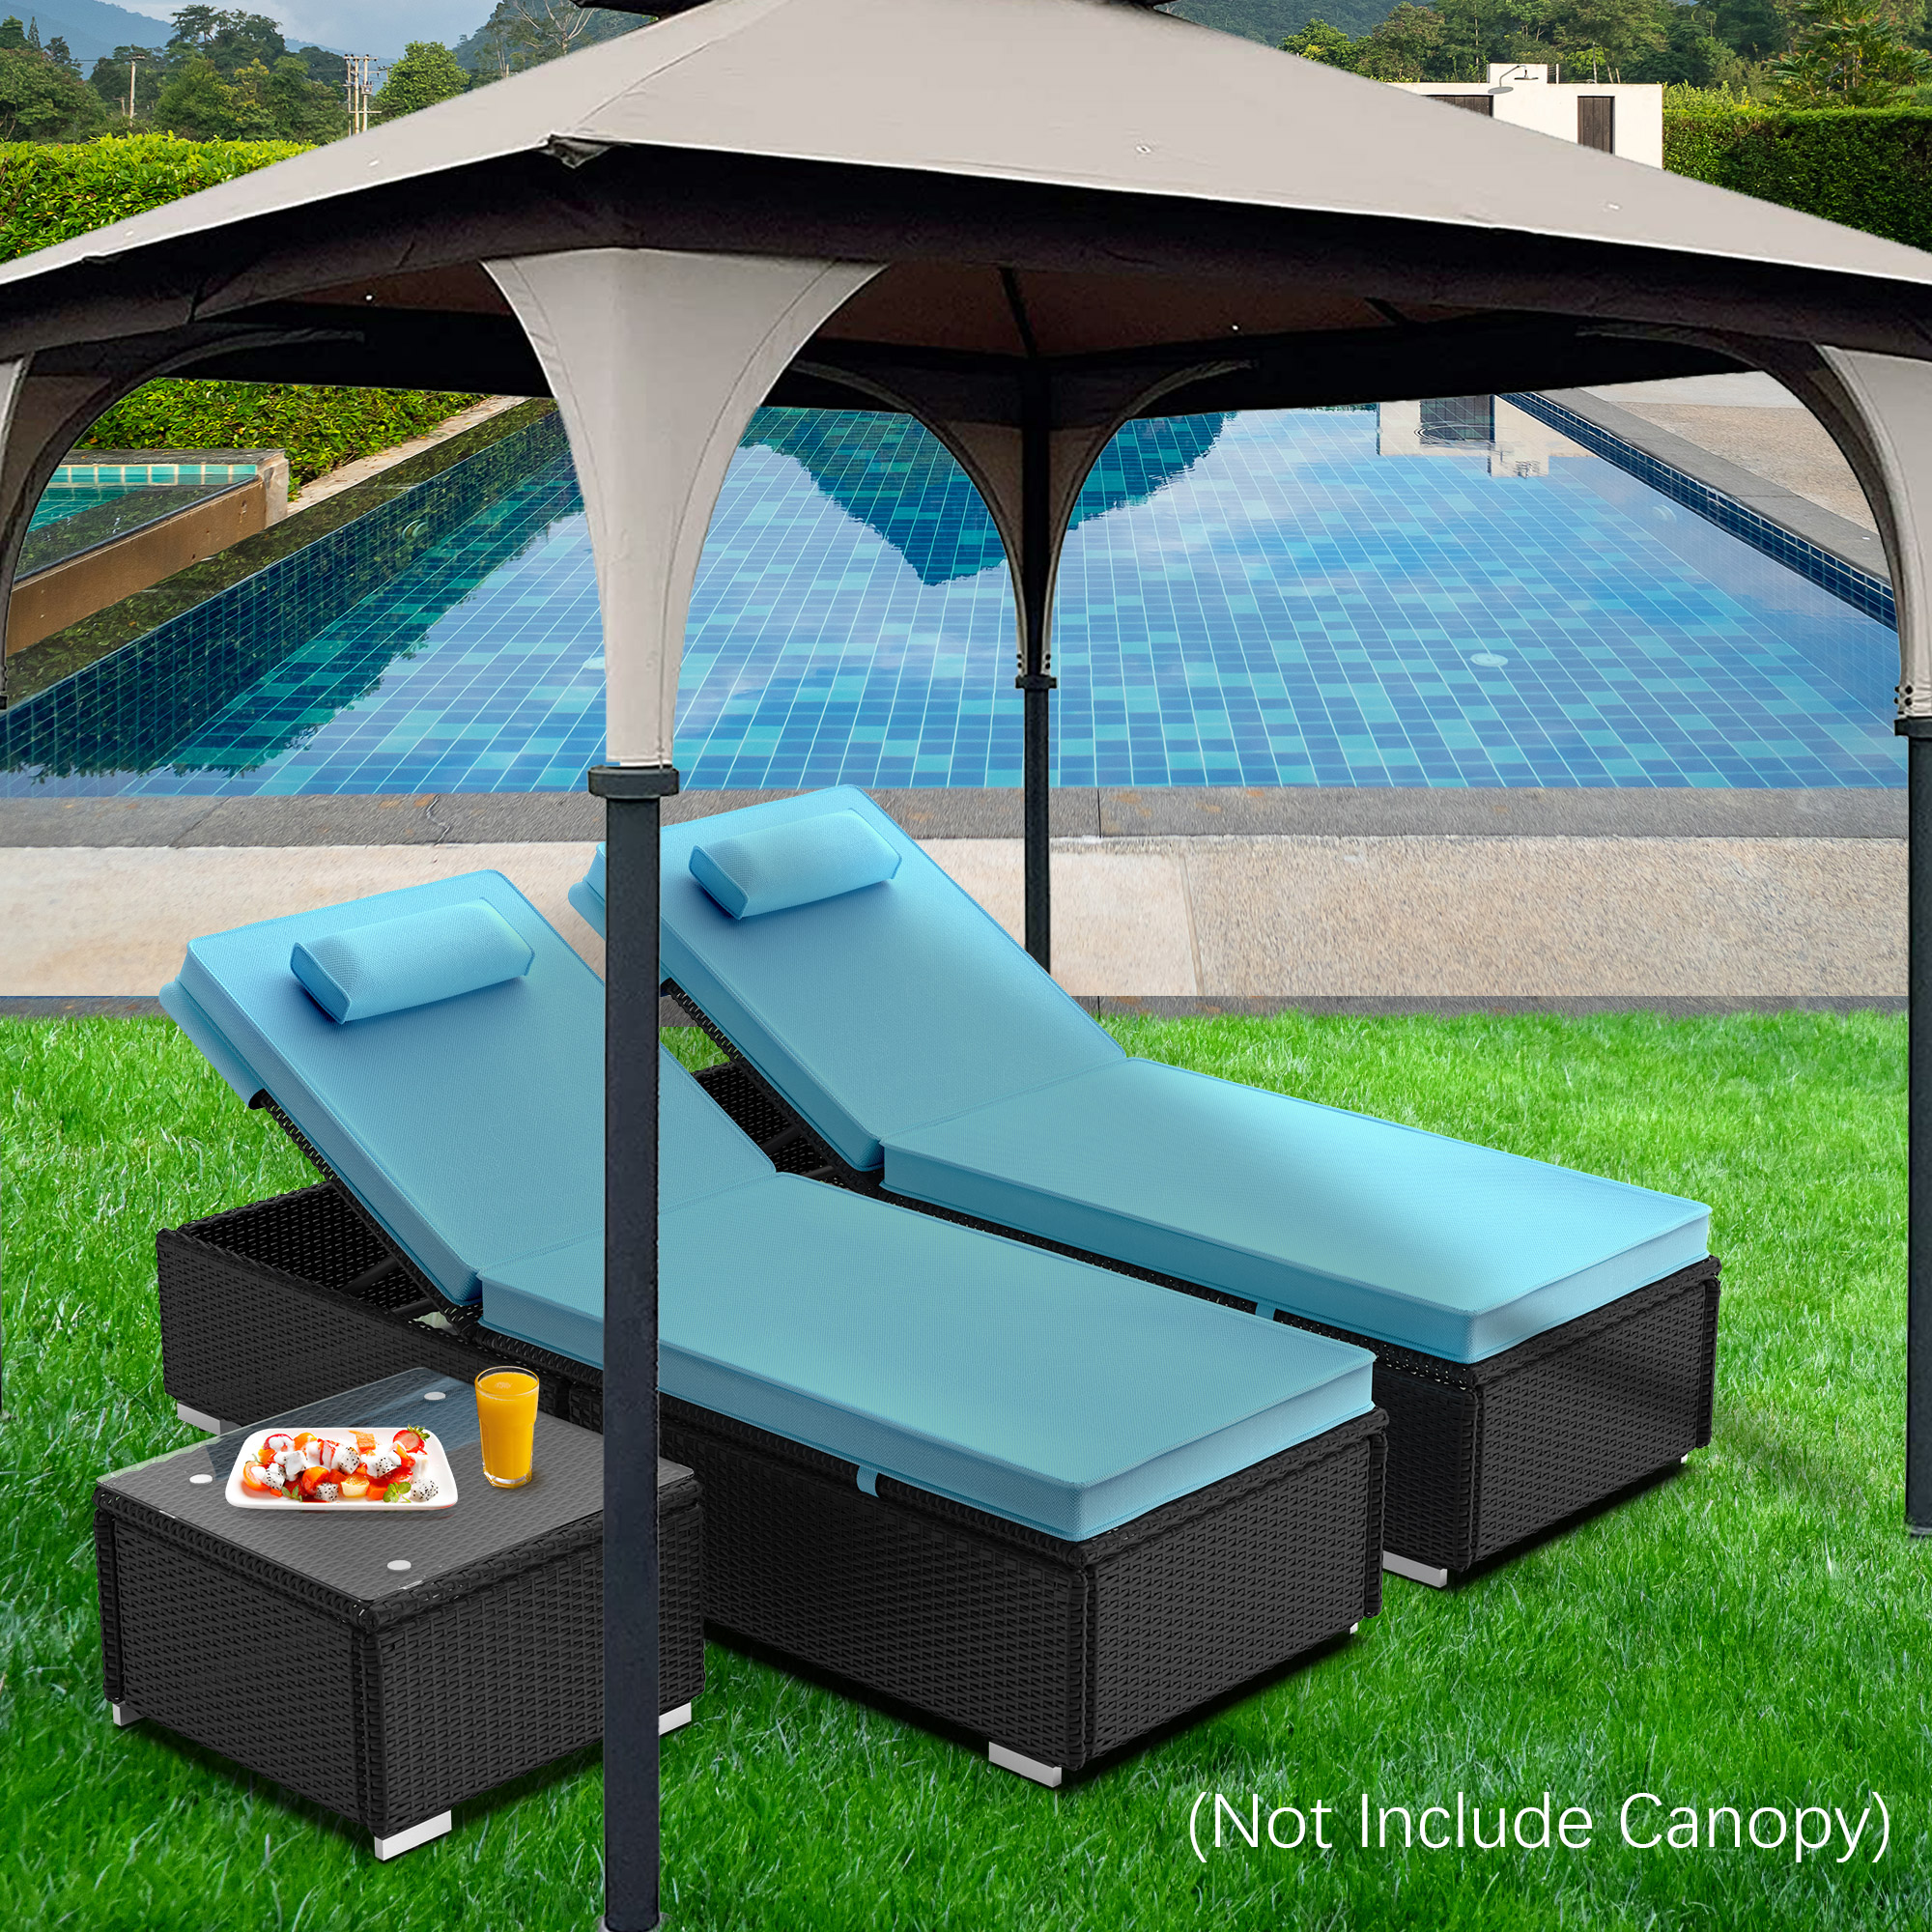 Reclining Outdoor Patio Lounge Furniture Set of 2, 3 Pieces All-Weather Poolside Rattan Wicker Pool Chaise Chairs Sets with 2 Pillows & Coffee Table, Brown PE Wicker and Blue, SS2114 - image 4 of 13